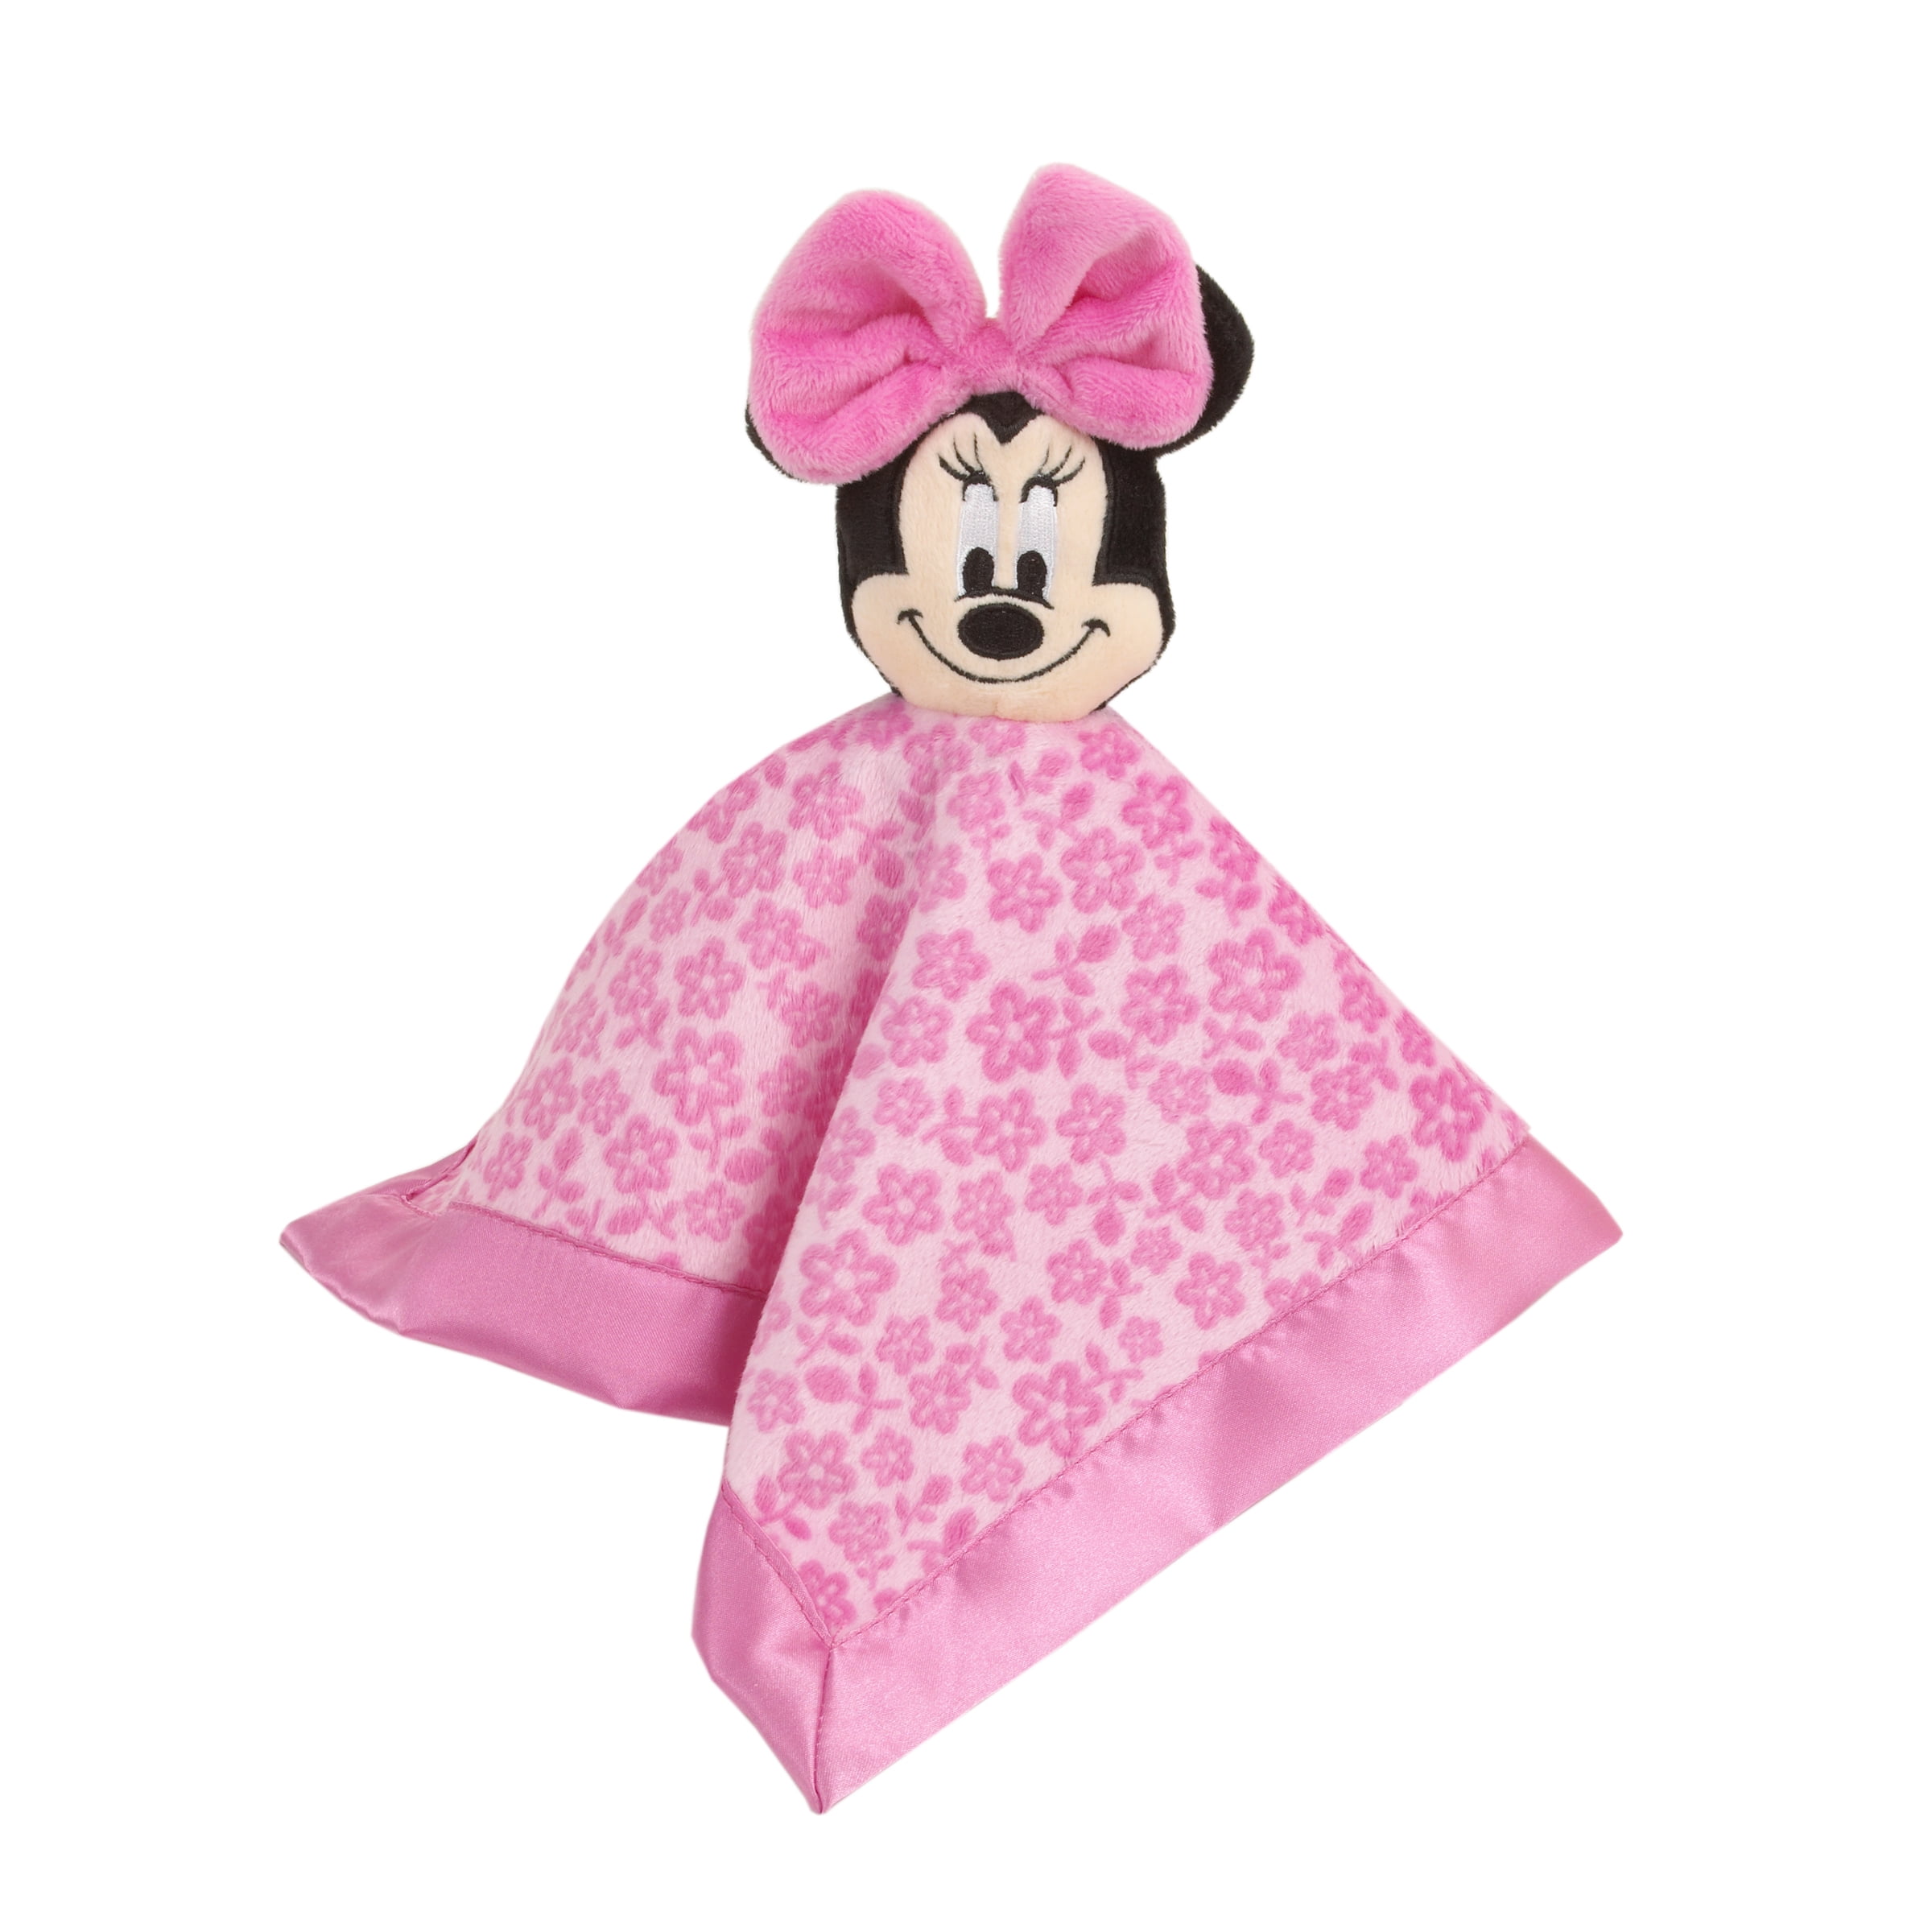 New Disney Minnie Mouse Snuggle Buddy Security Blanket Girls 